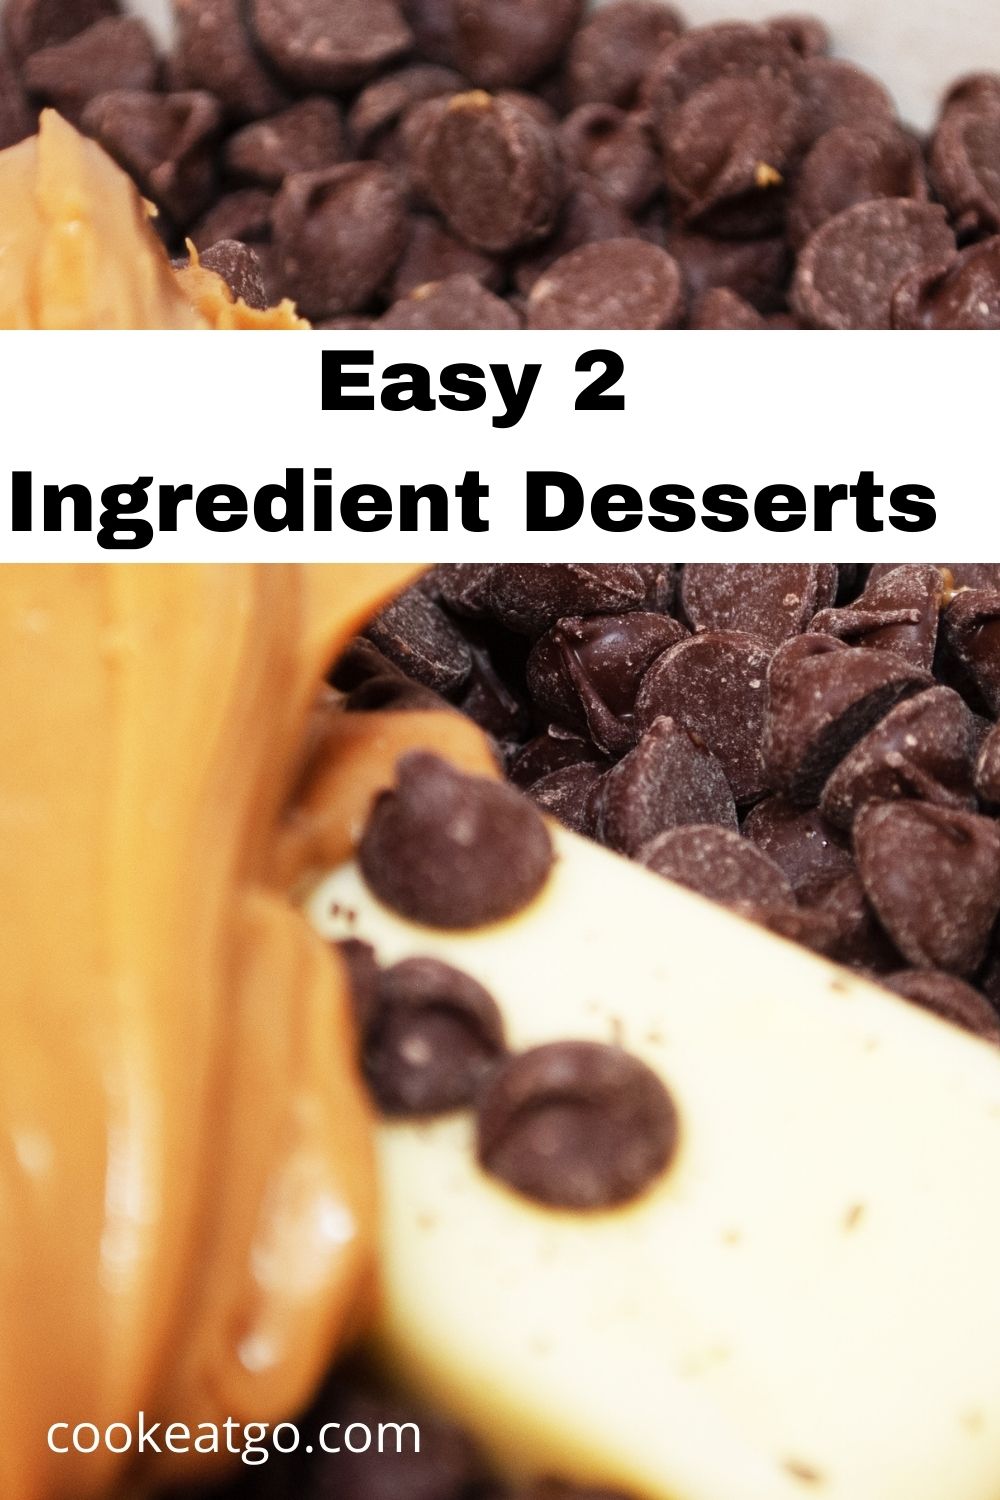 These Easy 2 Ingredients Dessert Recipes are perfect for the holidays, kids to make, or for pot luck get-togethers!! Either no-bake or bake they tasty! Fudge is so easy to make with just two ingredients. Angel food cake also pairs well with pie filling for a tasty light treat!